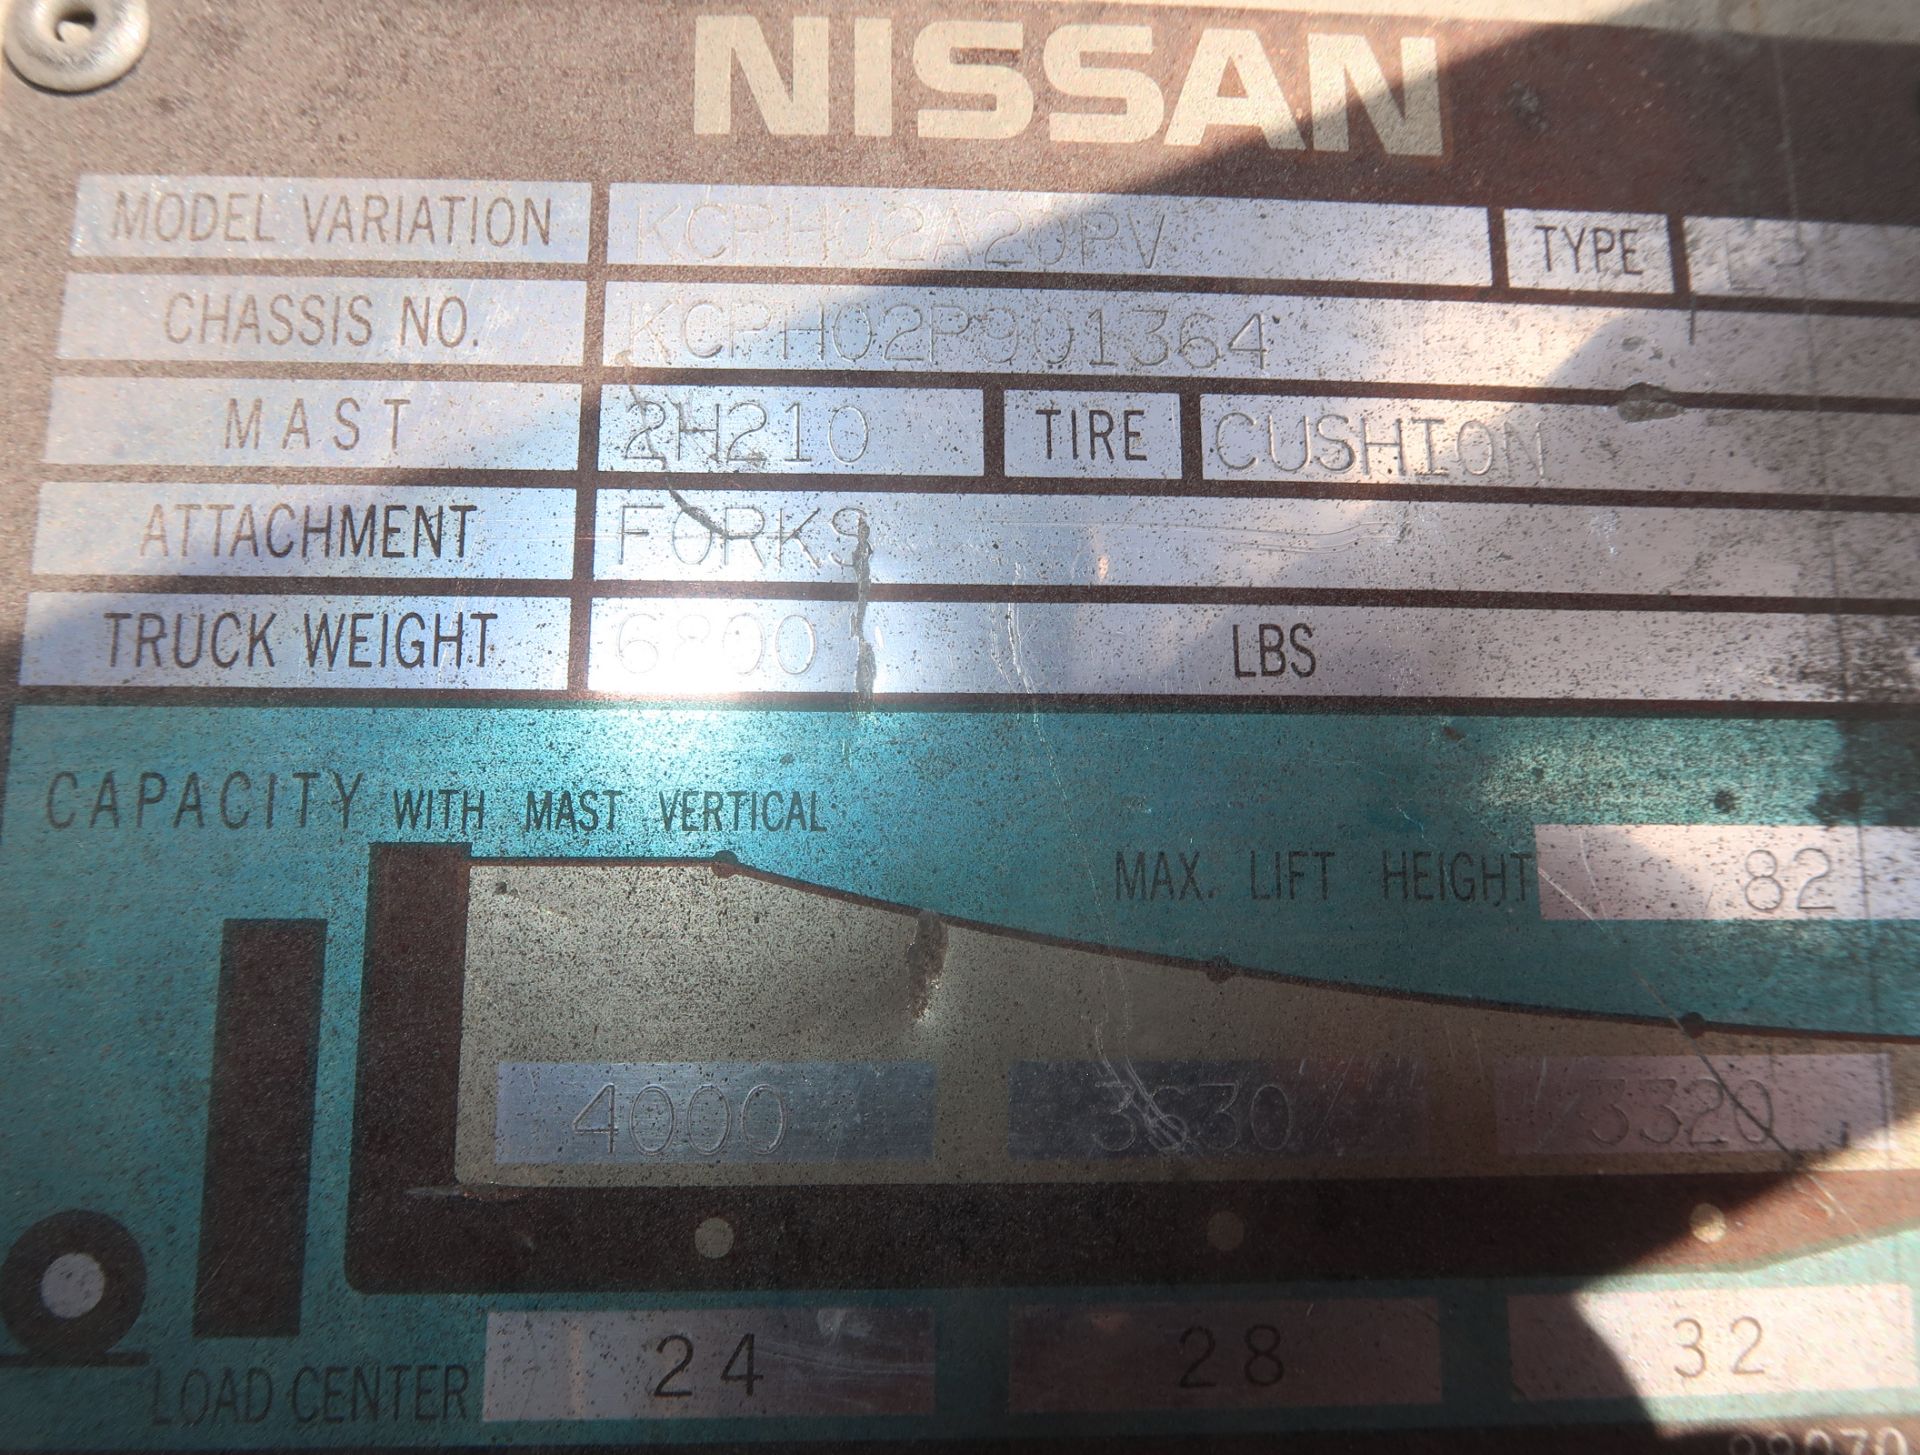 NISSAN SINGLE STAGE FORKLIFT, SOLID TIRE, PROPANE, 1193 HOURS, LOW MAST - Image 3 of 6